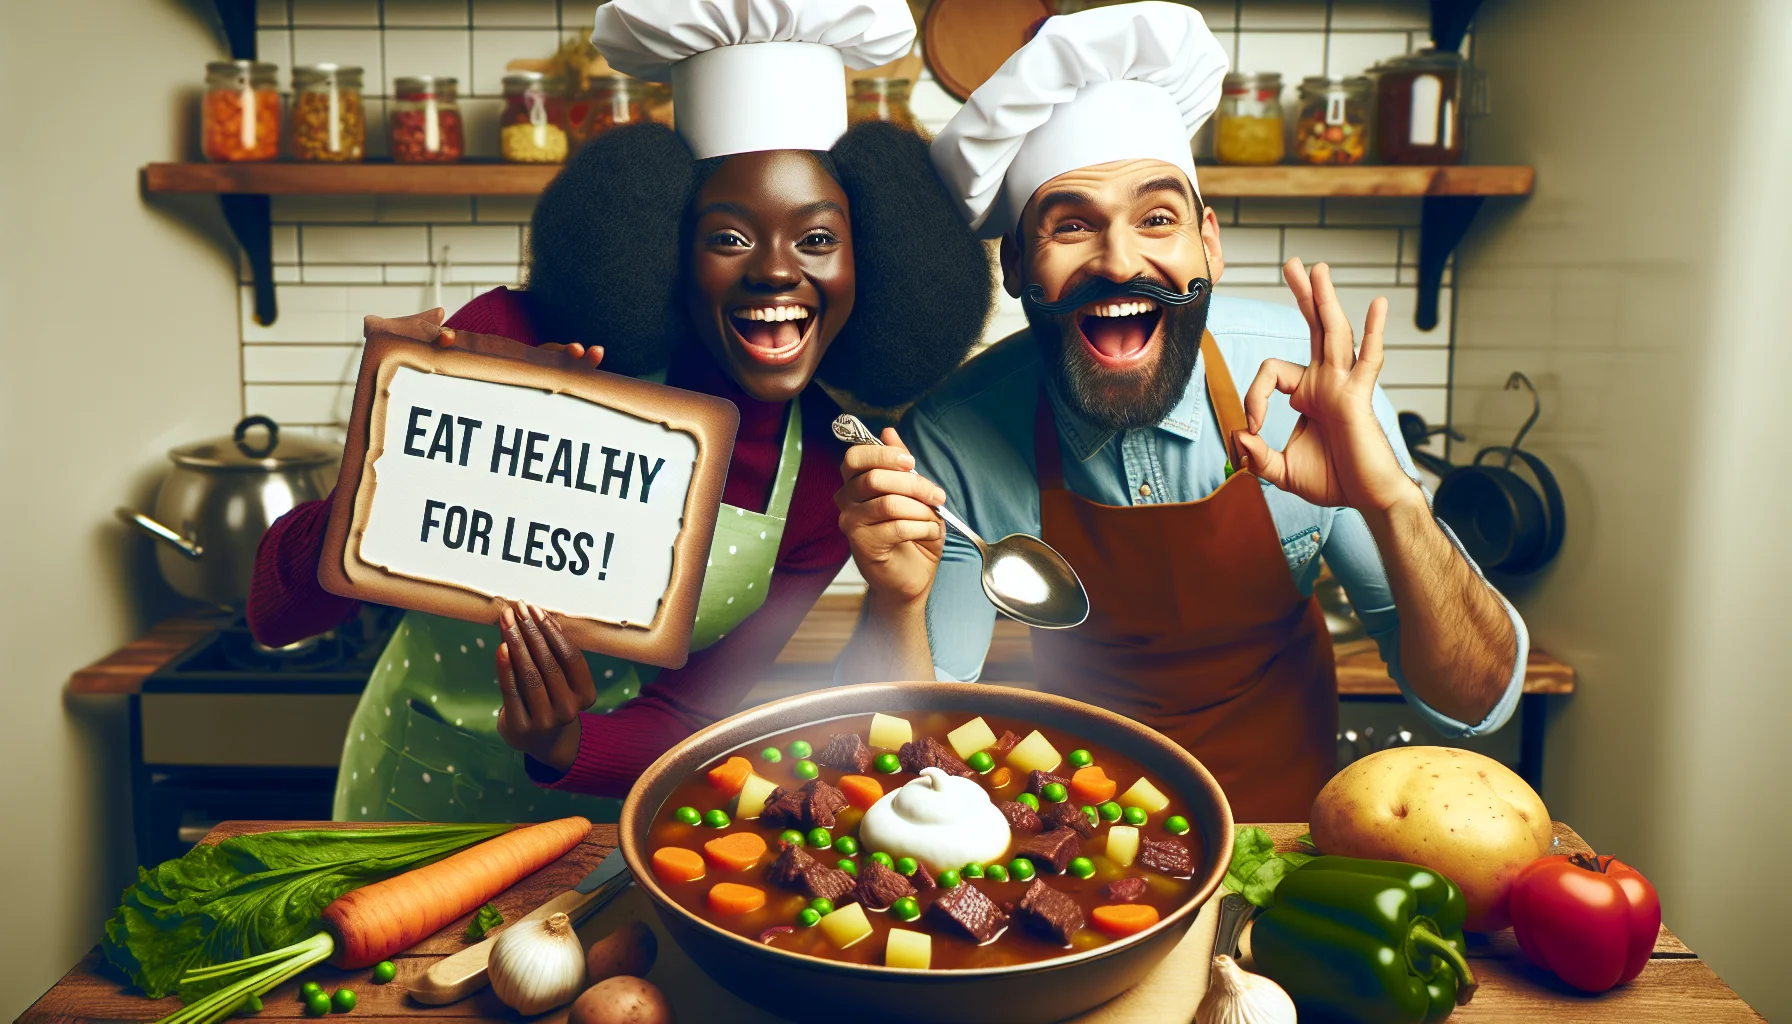 Imagine a charming and humorous scene related to preparing and enjoying a wholesome beef stew. Picture two individuals, an Hispanic man and a Black woman, both dressed as fun-loving chefs with whimsical aprons and chef hats. They're smiling and laughing while preparing a budget-friendly, hearty beef stew filled with an abundance of colorful vegetables like carrots, peas, and potatoes. The woman is holding up a sign that reads 'Eat Healthy for Less' with a cheeky wink. In the foreground, have a bowl of the delicious, steaming stew, highlighting its substantiality and taste. The scene should convey a sense of fun, health, and budget-friendly cooking.